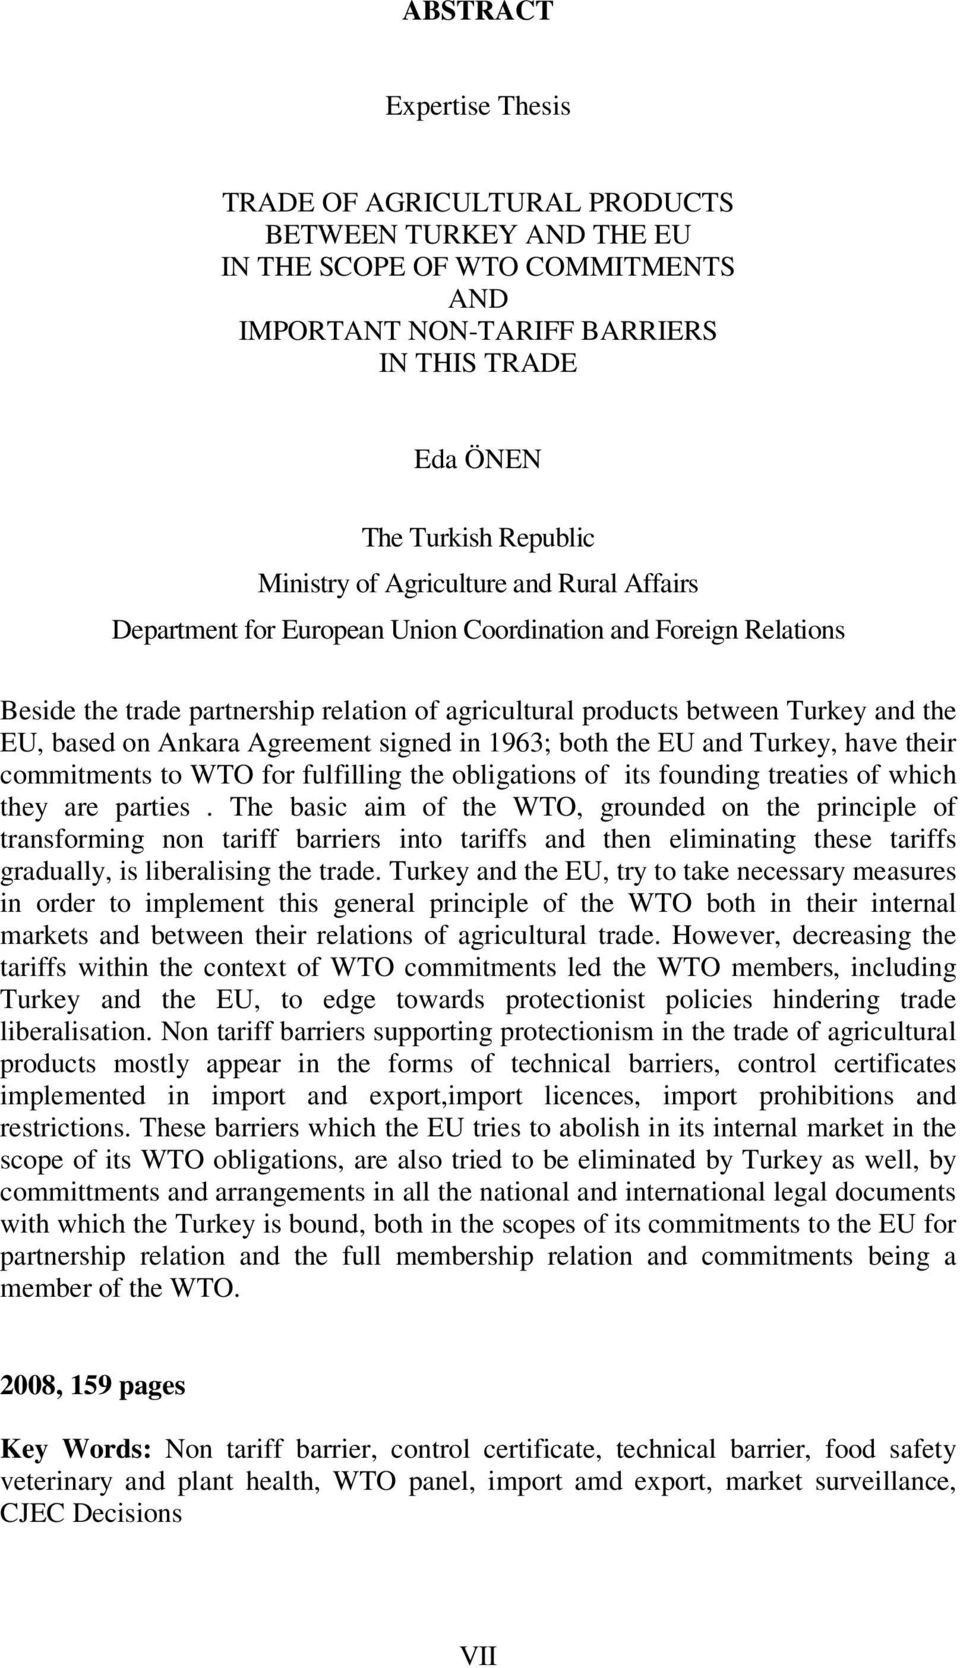 based on Ankara Agreement signed in 1963; both the EU and Turkey, have their commitments to WTO for fulfilling the obligations of its founding treaties of which they are parties.